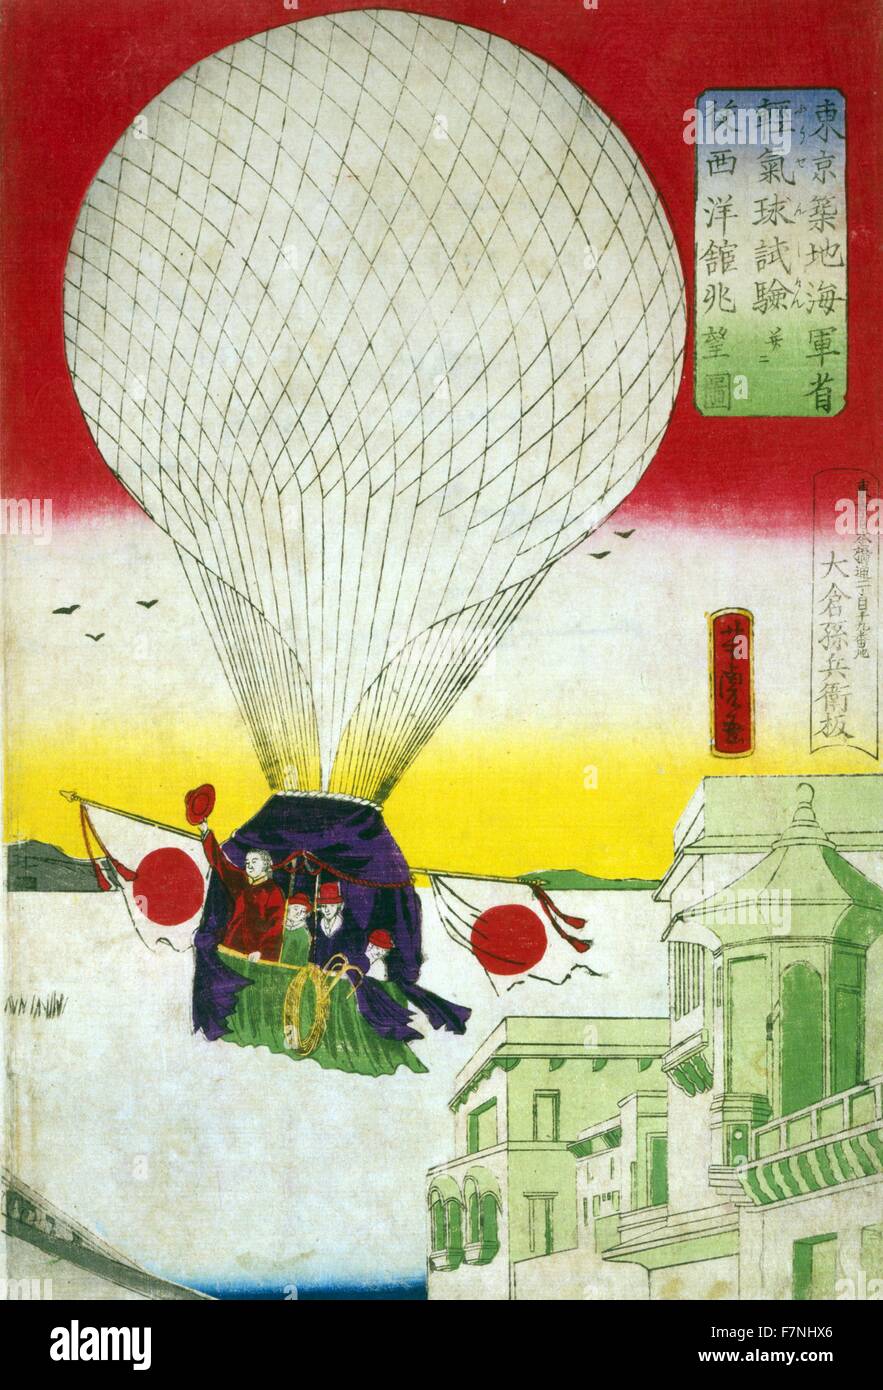 Japanese navy department tests balloons in front of the American Consulate by Yoshitora Utagawa, 1867 Stock Photo